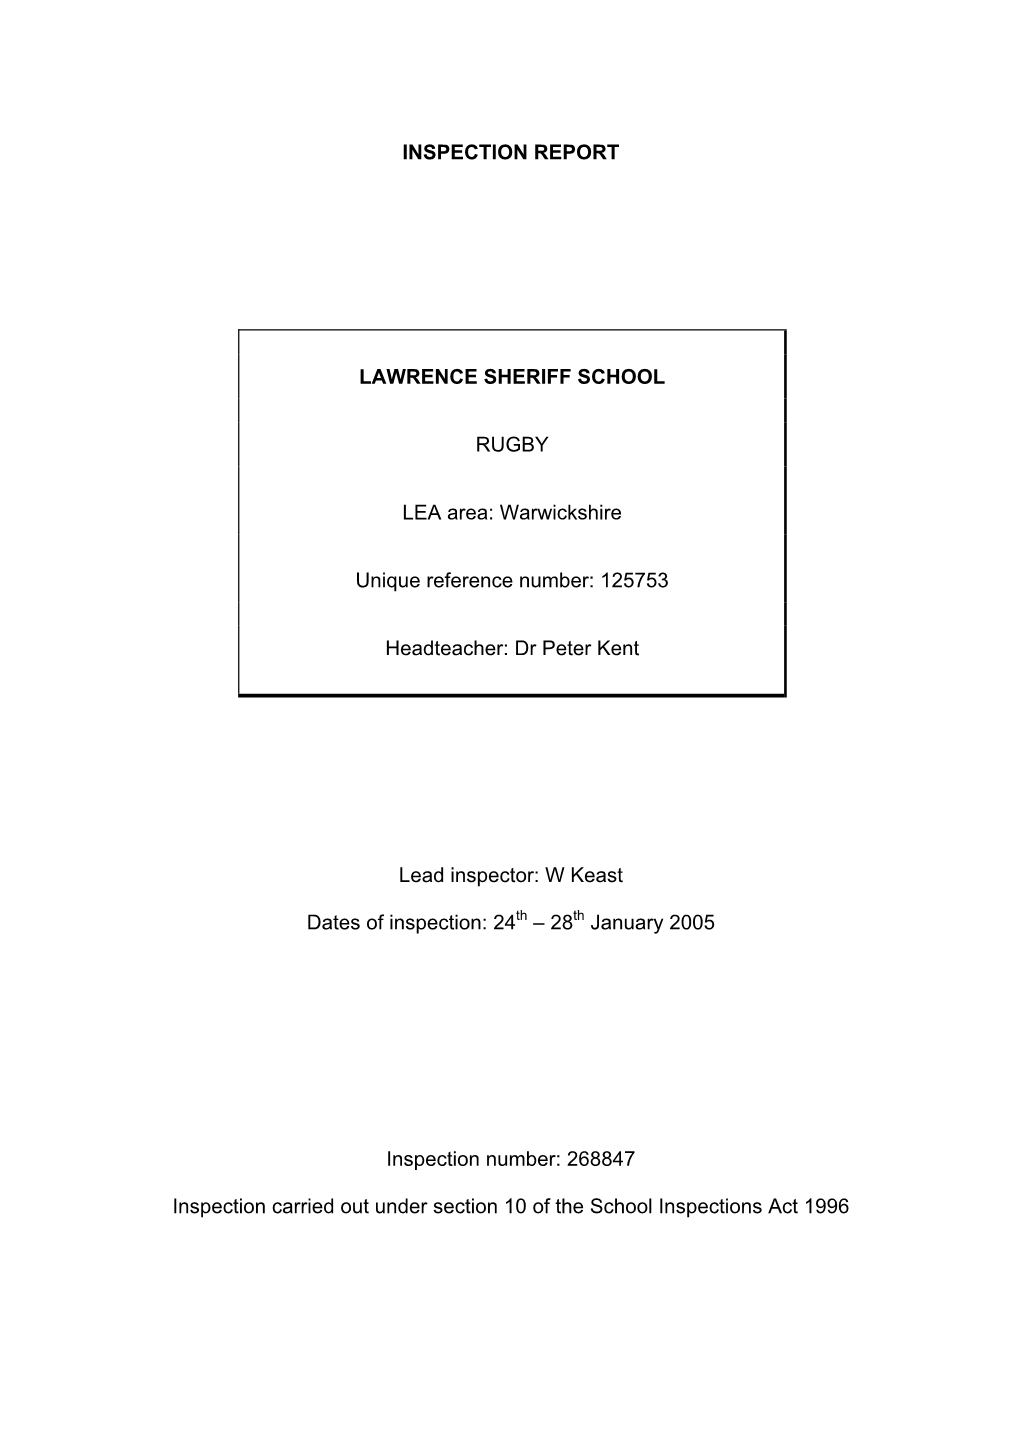 INSPECTION REPORT LAWRENCE SHERIFF SCHOOL RUGBY LEA Area